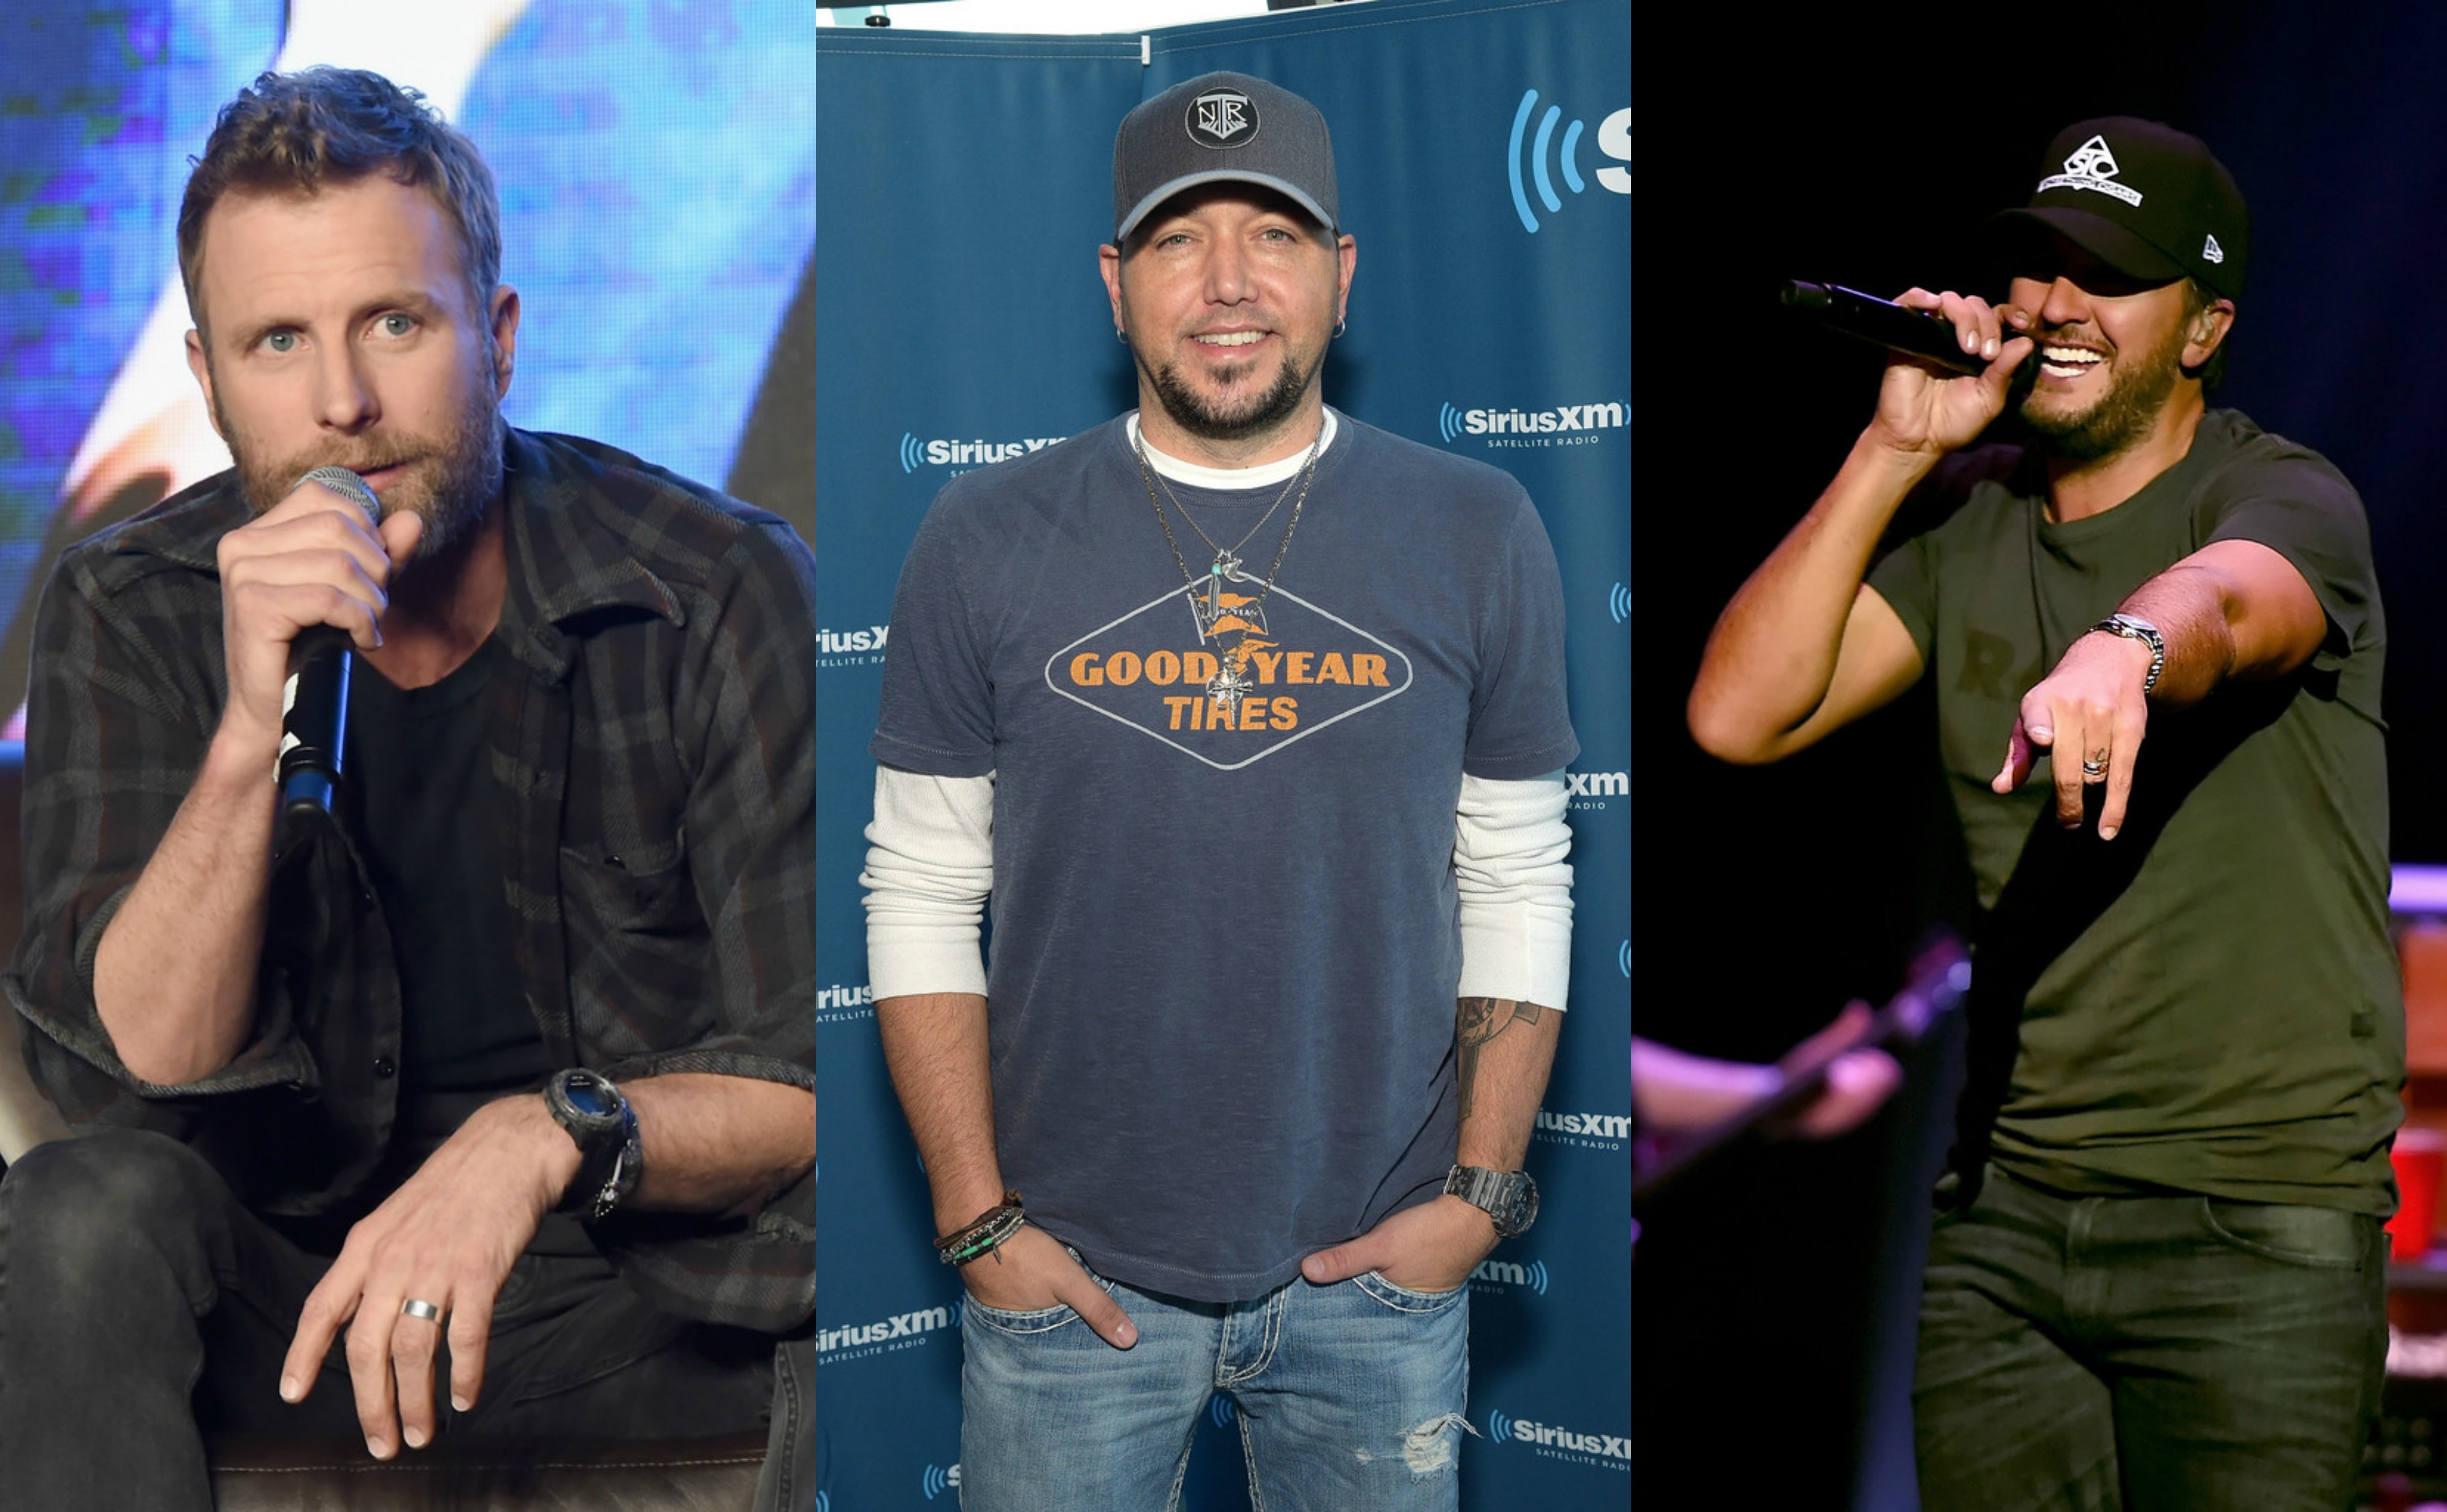 Jason Aldean, Luke Bryan, Dierks Bentley & More to Perform at the 53rd Academy of Country Music Awards